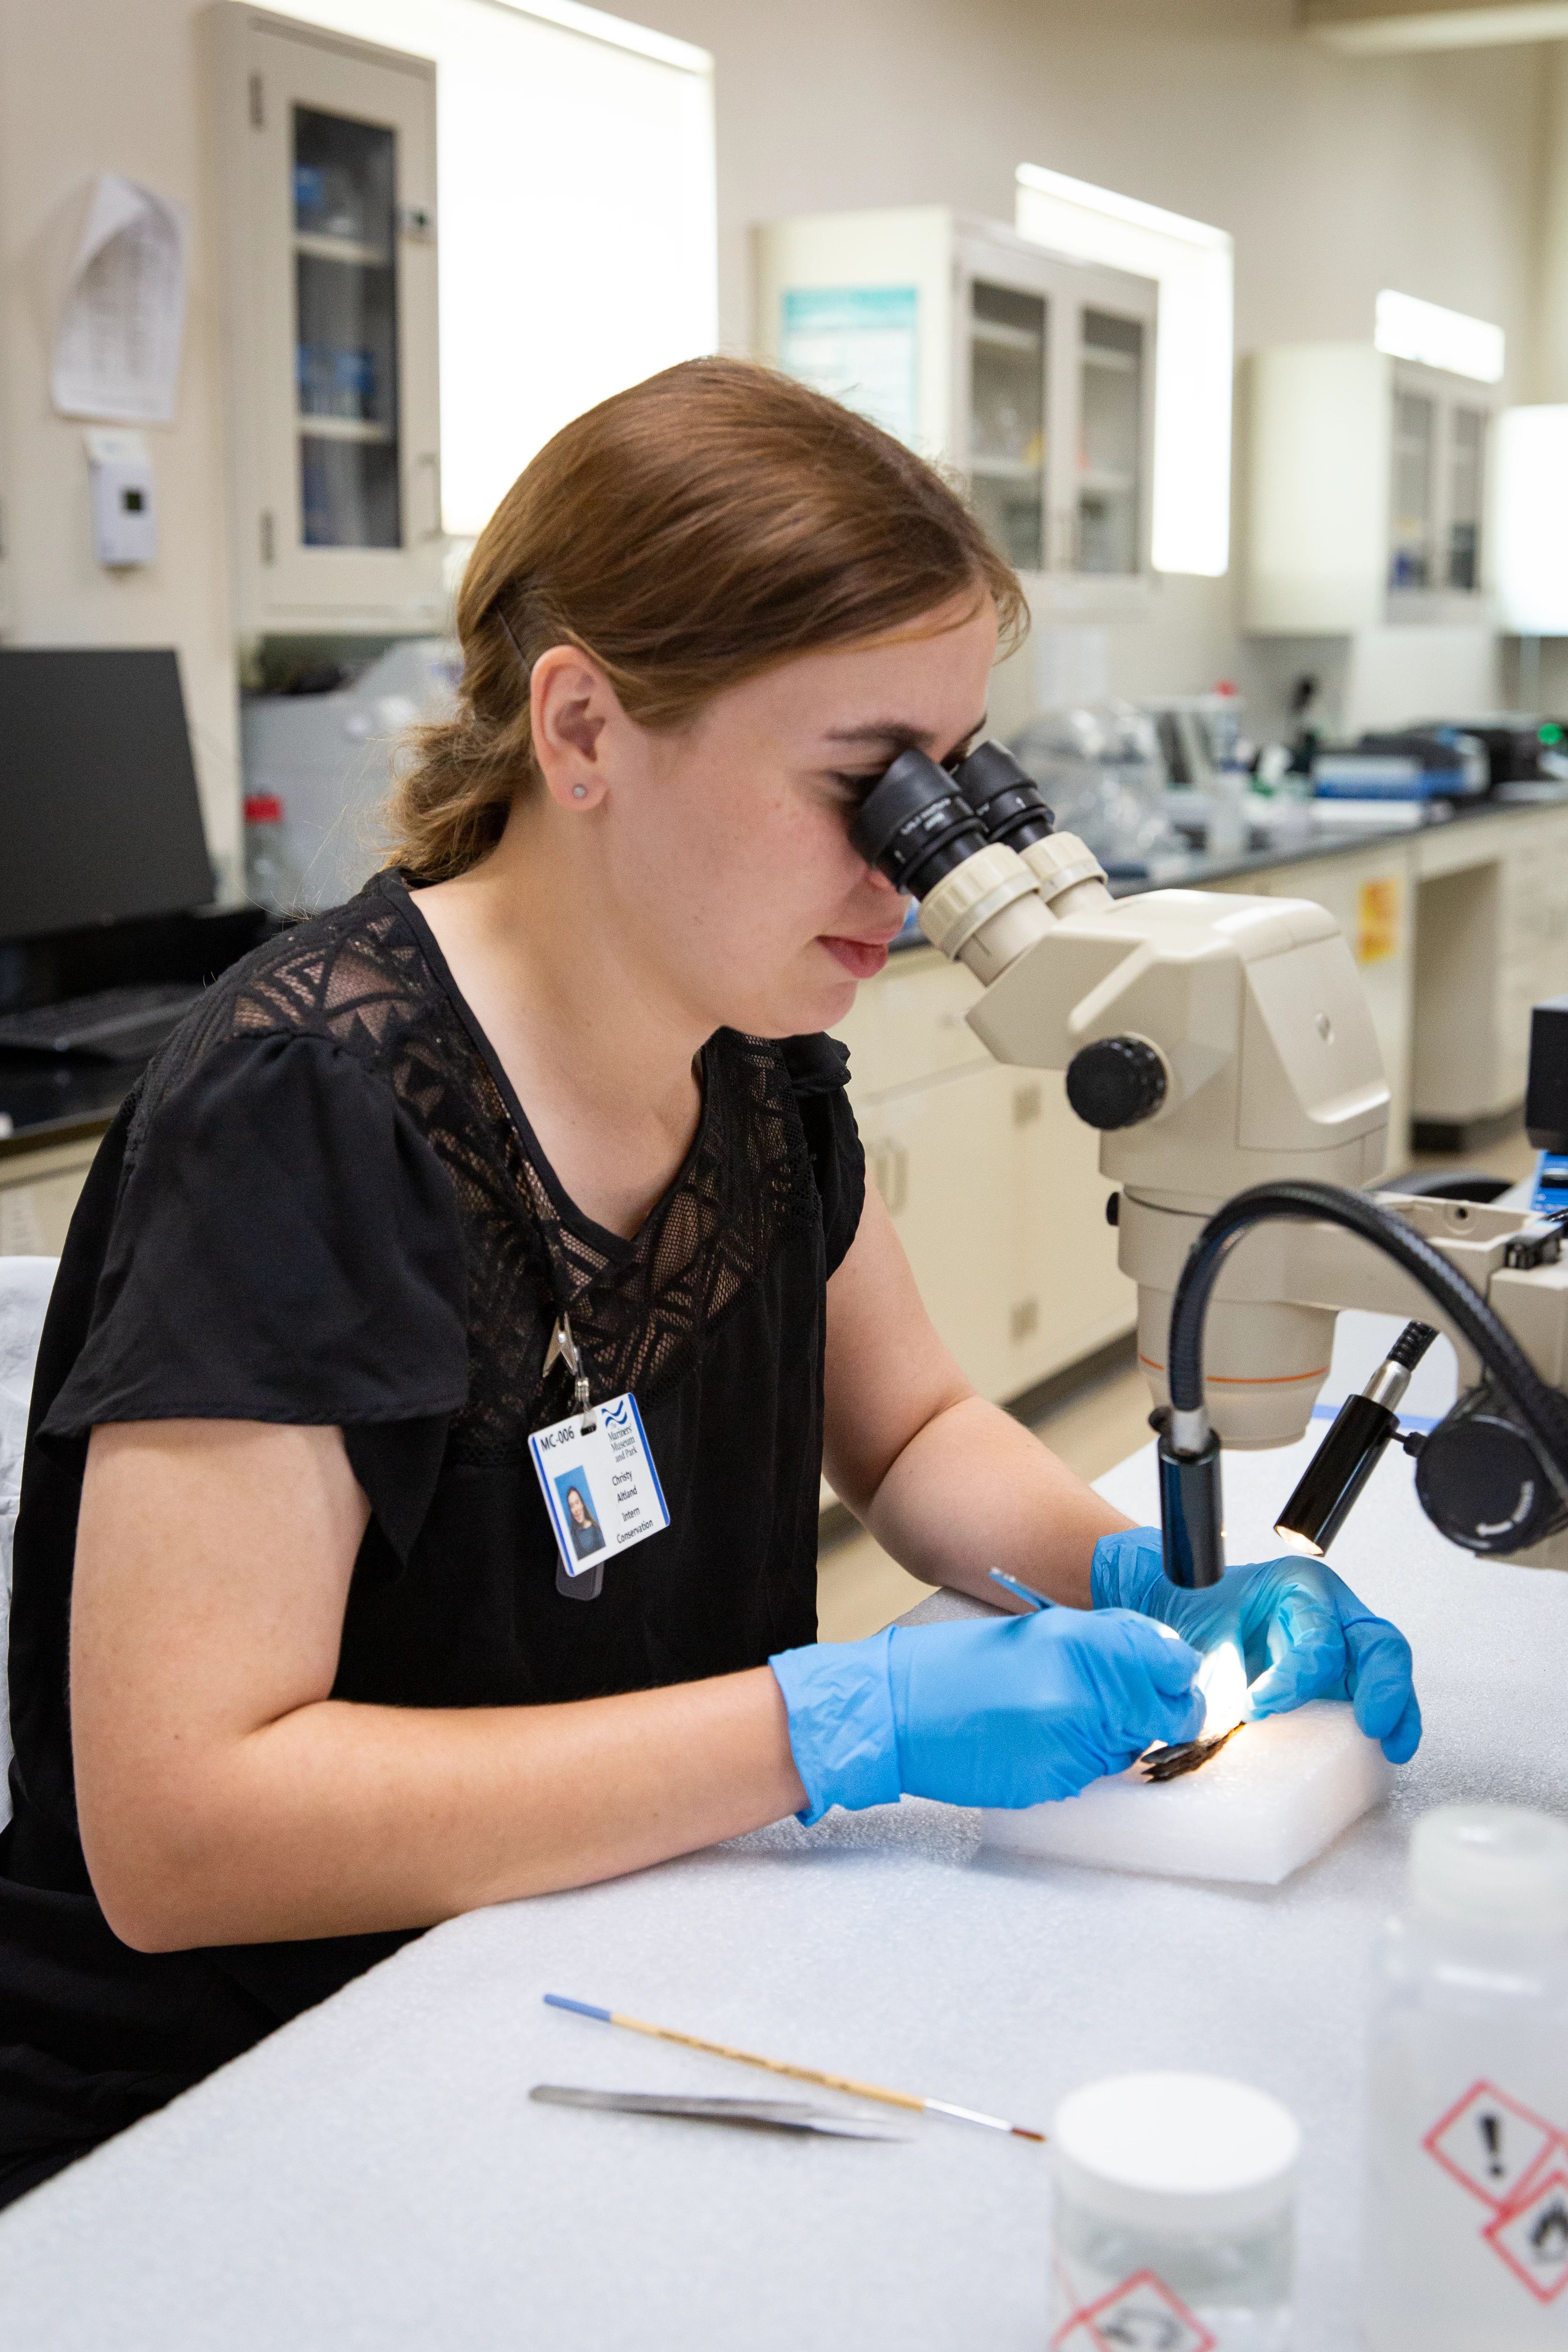 Conservation intern working in the Clean Lab looking at an object through a microscope.